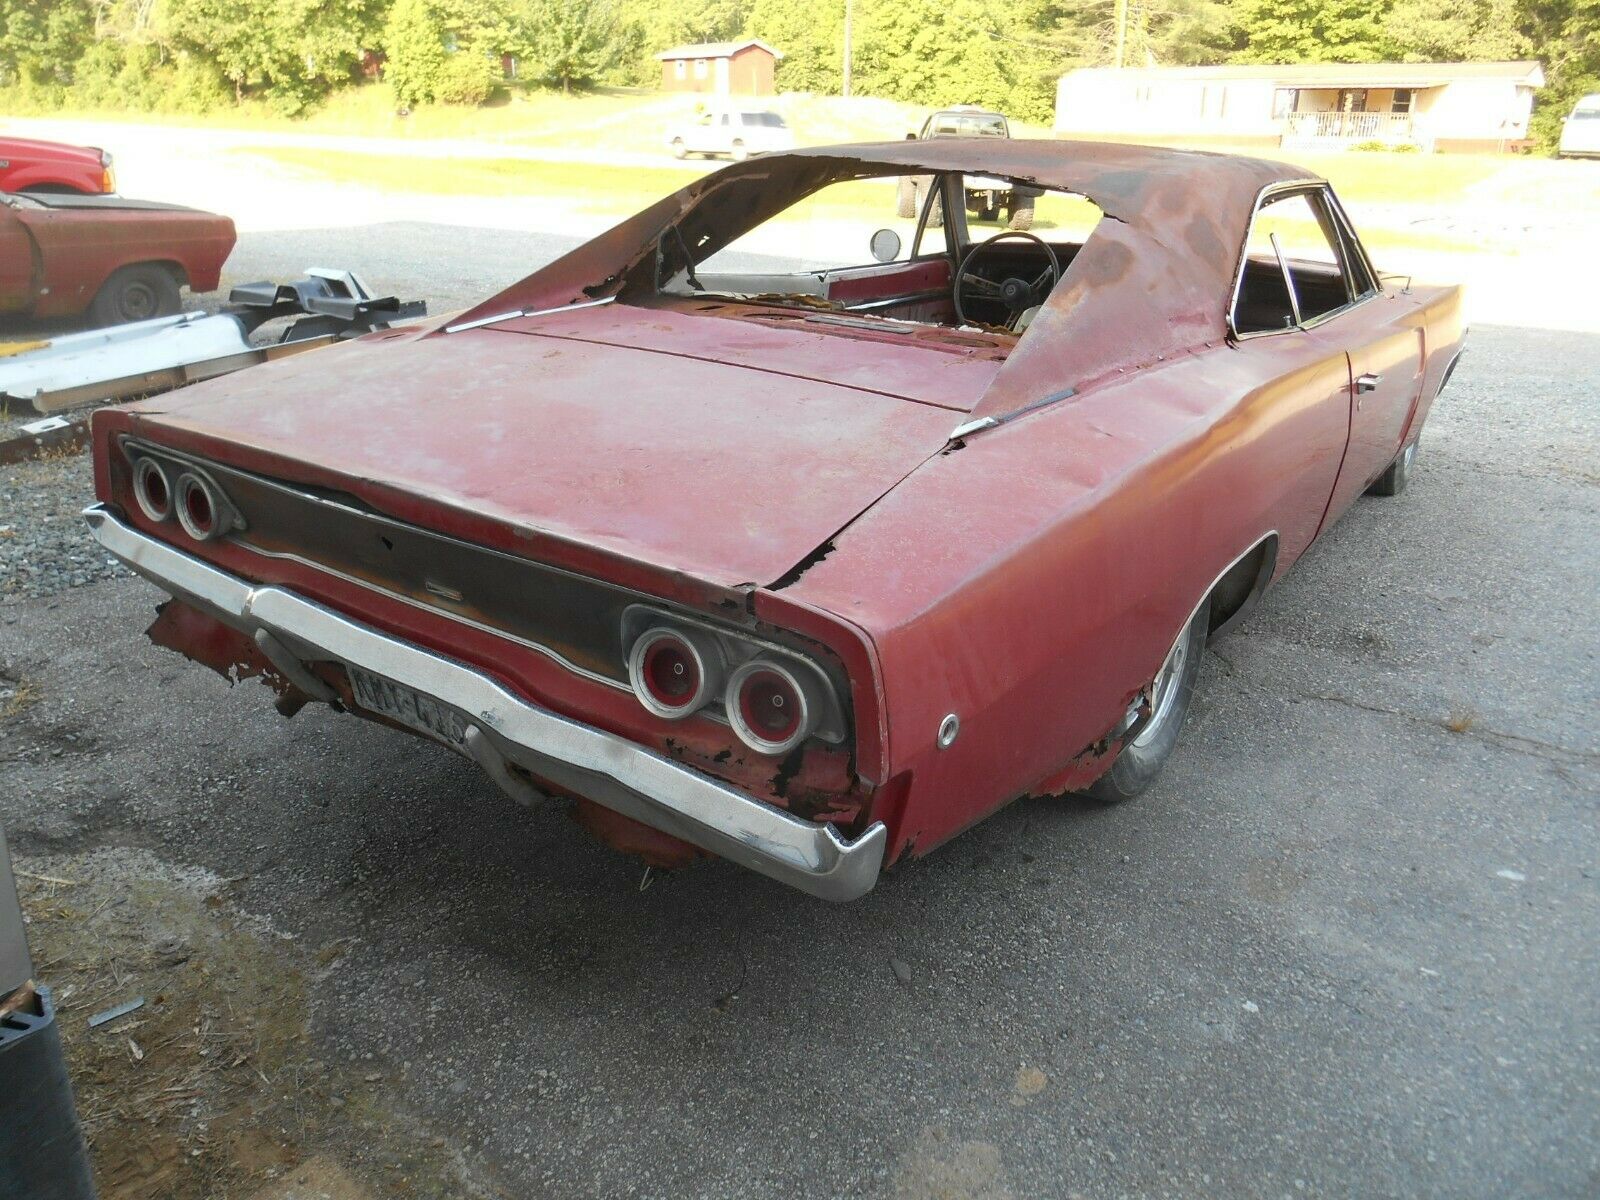 This 1968 Dodge Charger Is A Rare Car Not Appropriate For Amateur Restorers Autoevolution